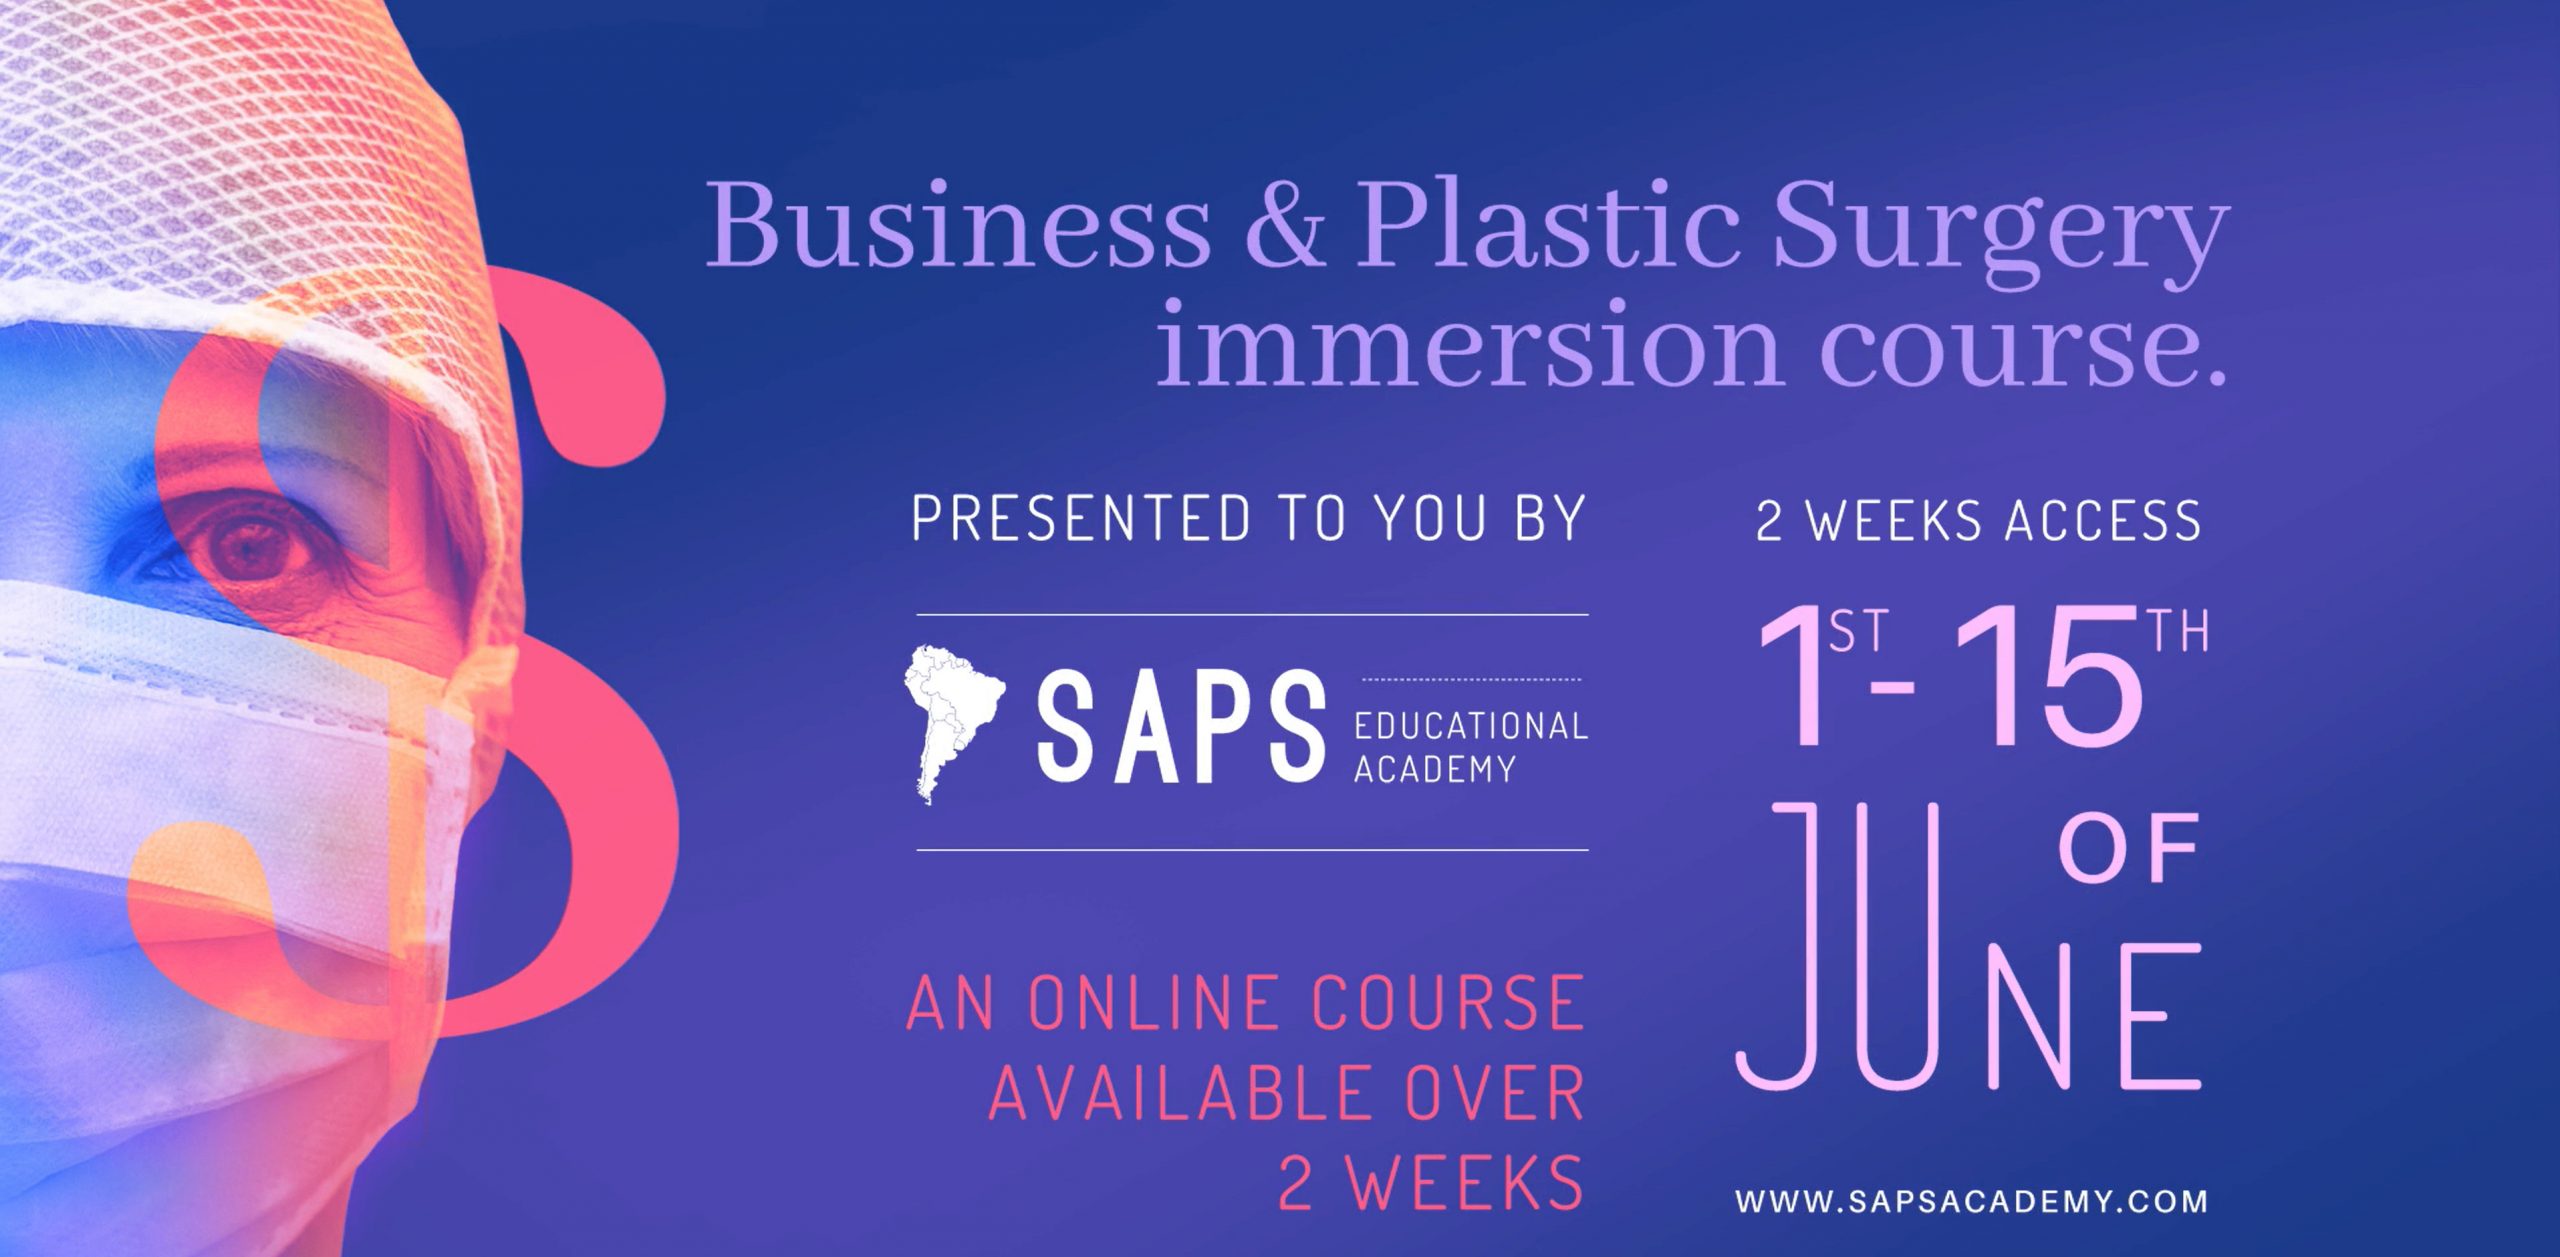 South American Plastic Surgery Business & Plastic Surgery Immersion Course 2020